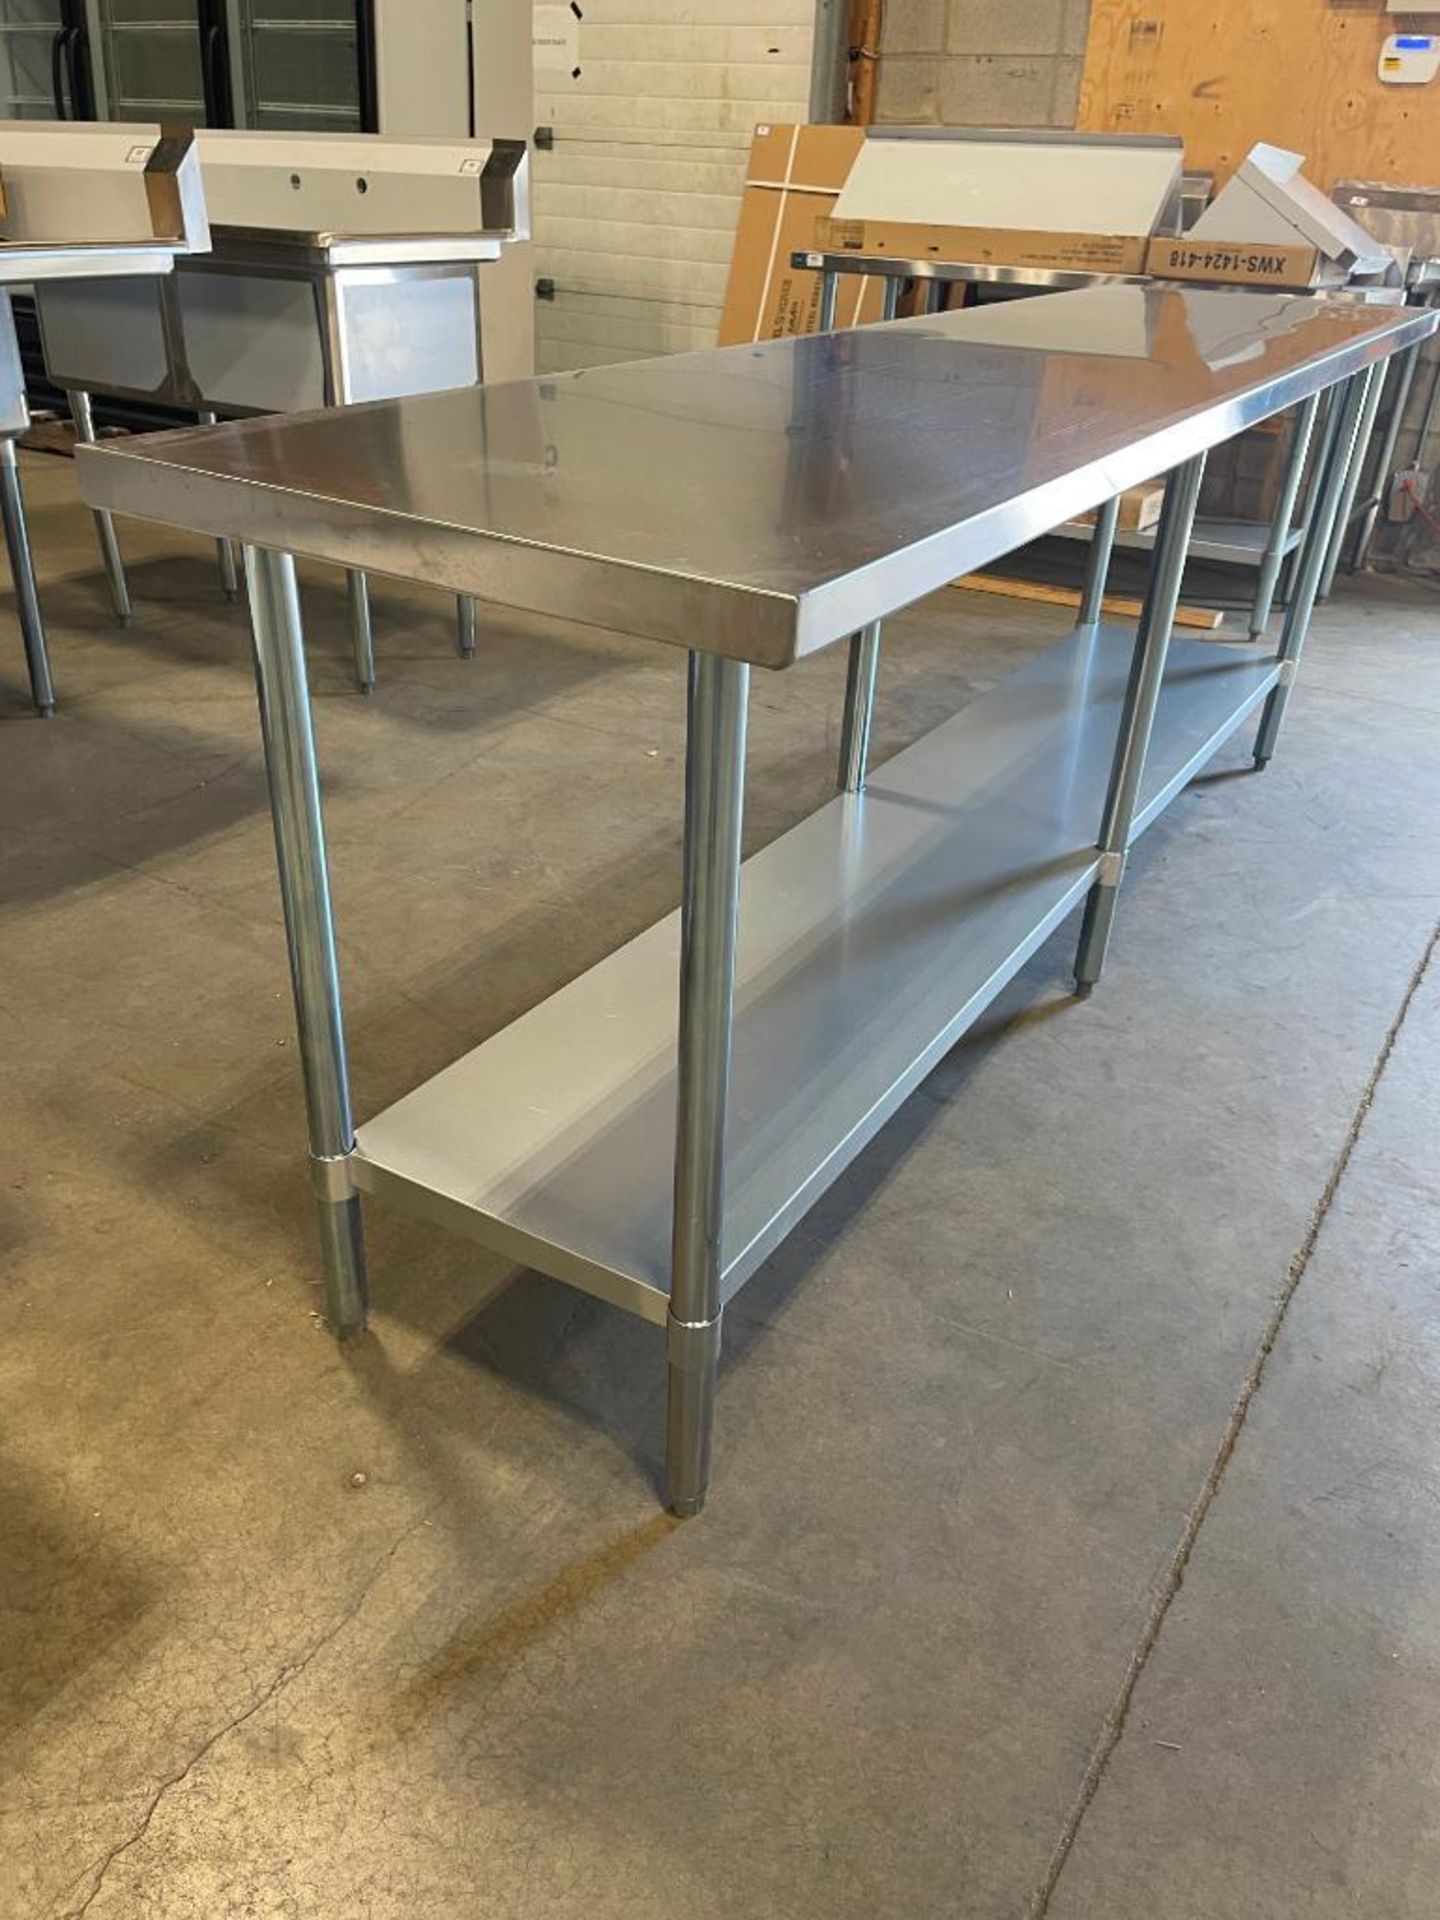 NEW 24" X 96" STAINLESS STEEL WORK TABLE WITH UNDERSHELF - Image 4 of 8